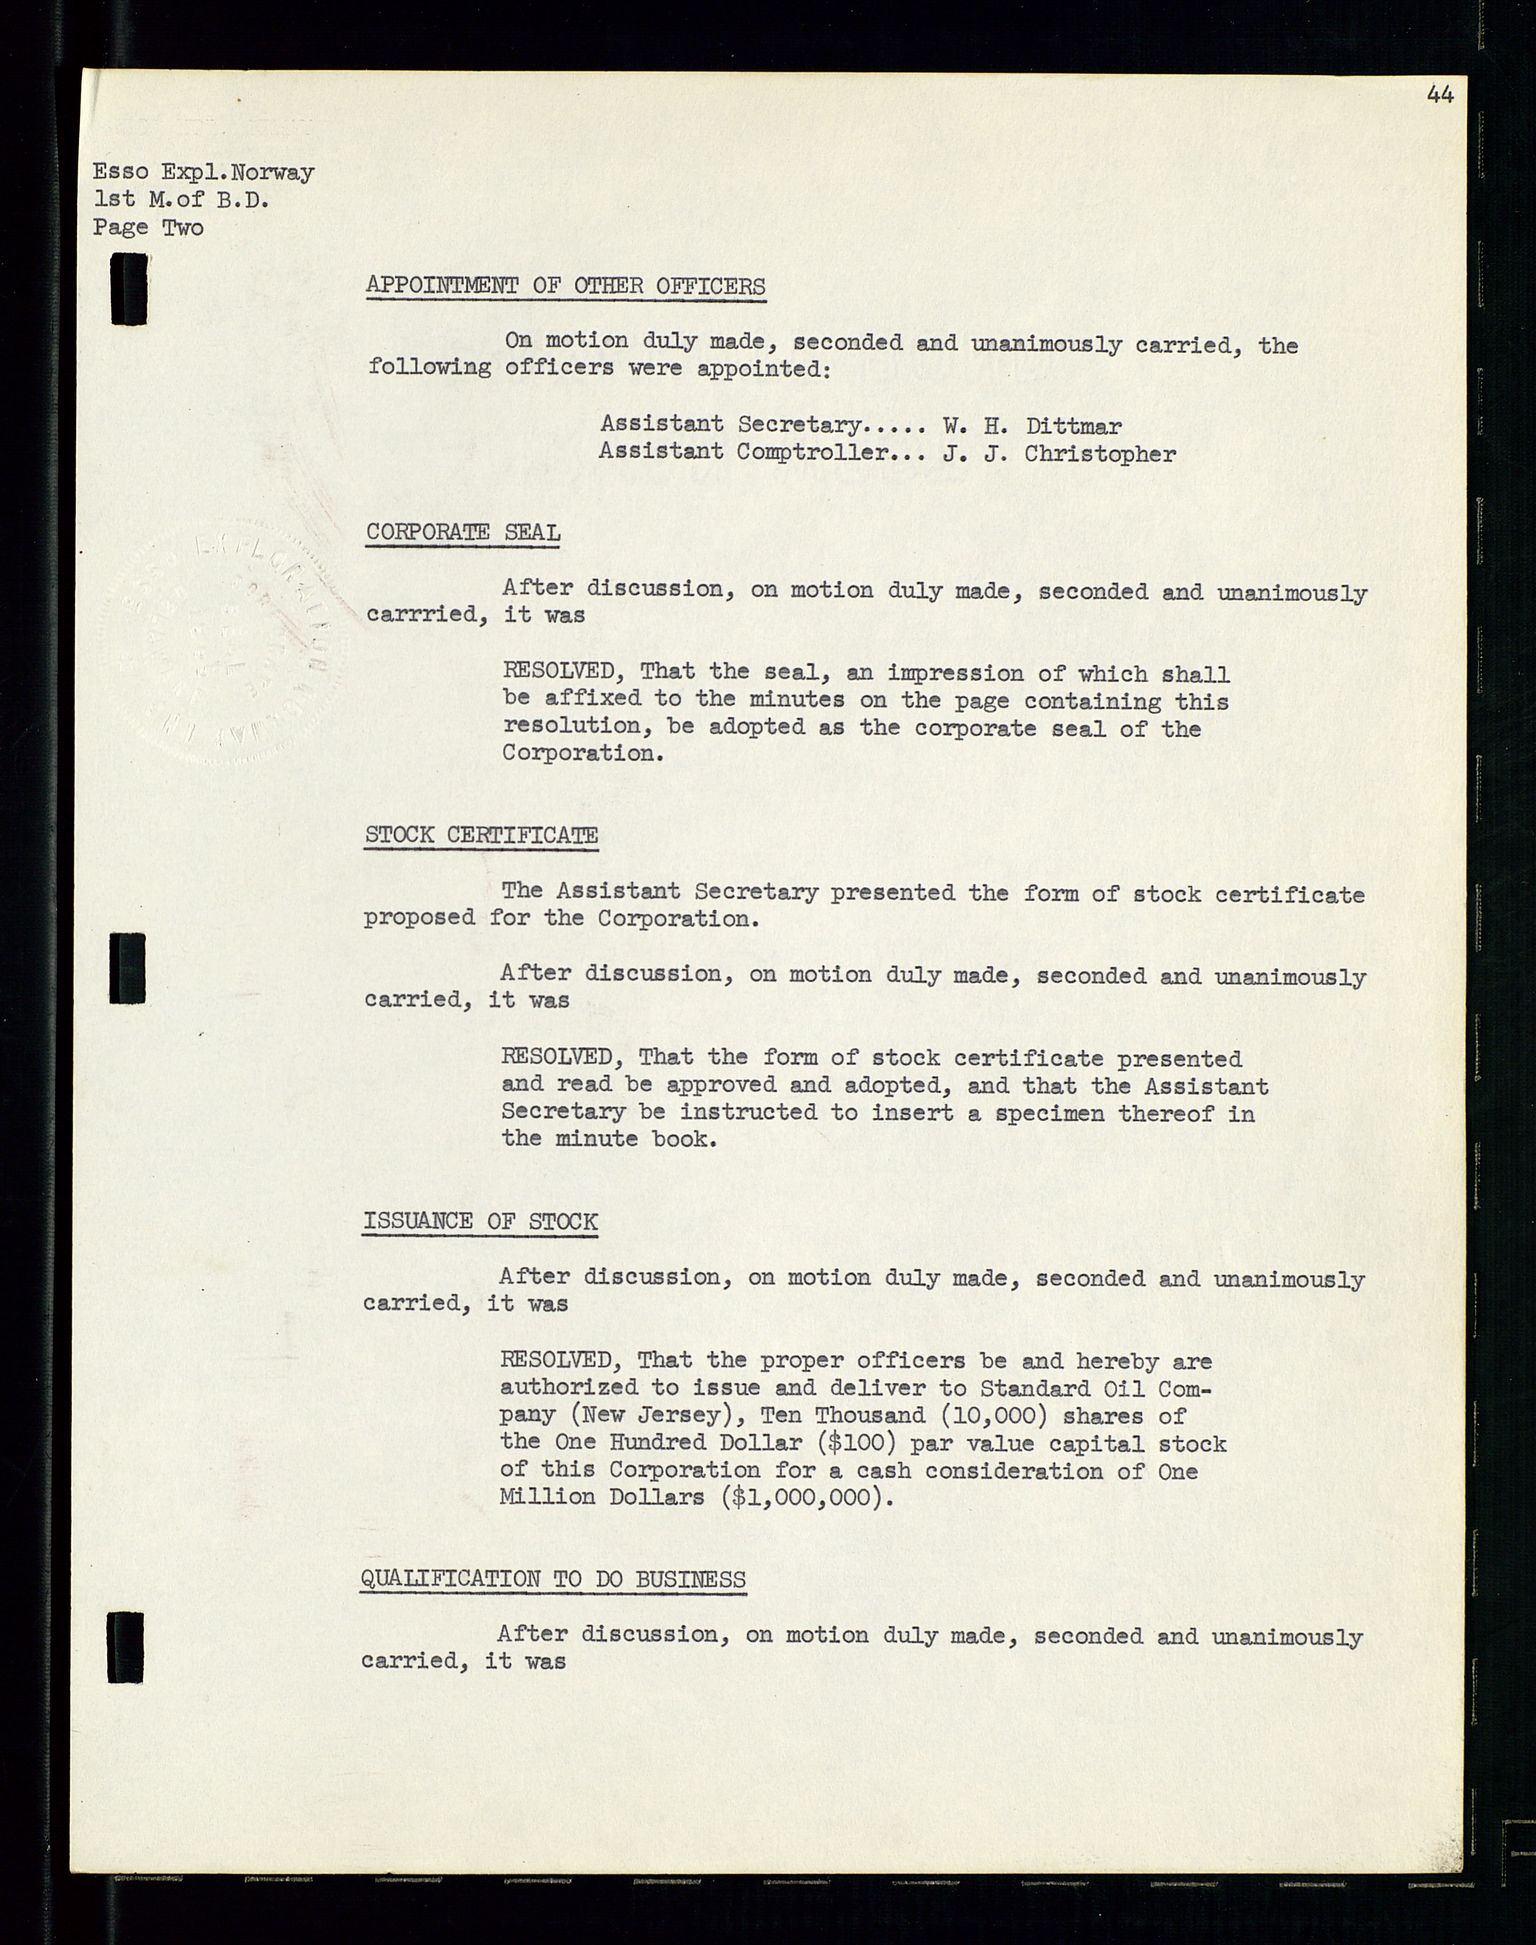 Pa 1512 - Esso Exploration and Production Norway Inc., SAST/A-101917/A/Aa/L0001/0001: Styredokumenter / Corporate records, By-Laws, Board meeting minutes, Incorporations, 1965-1975, s. 44